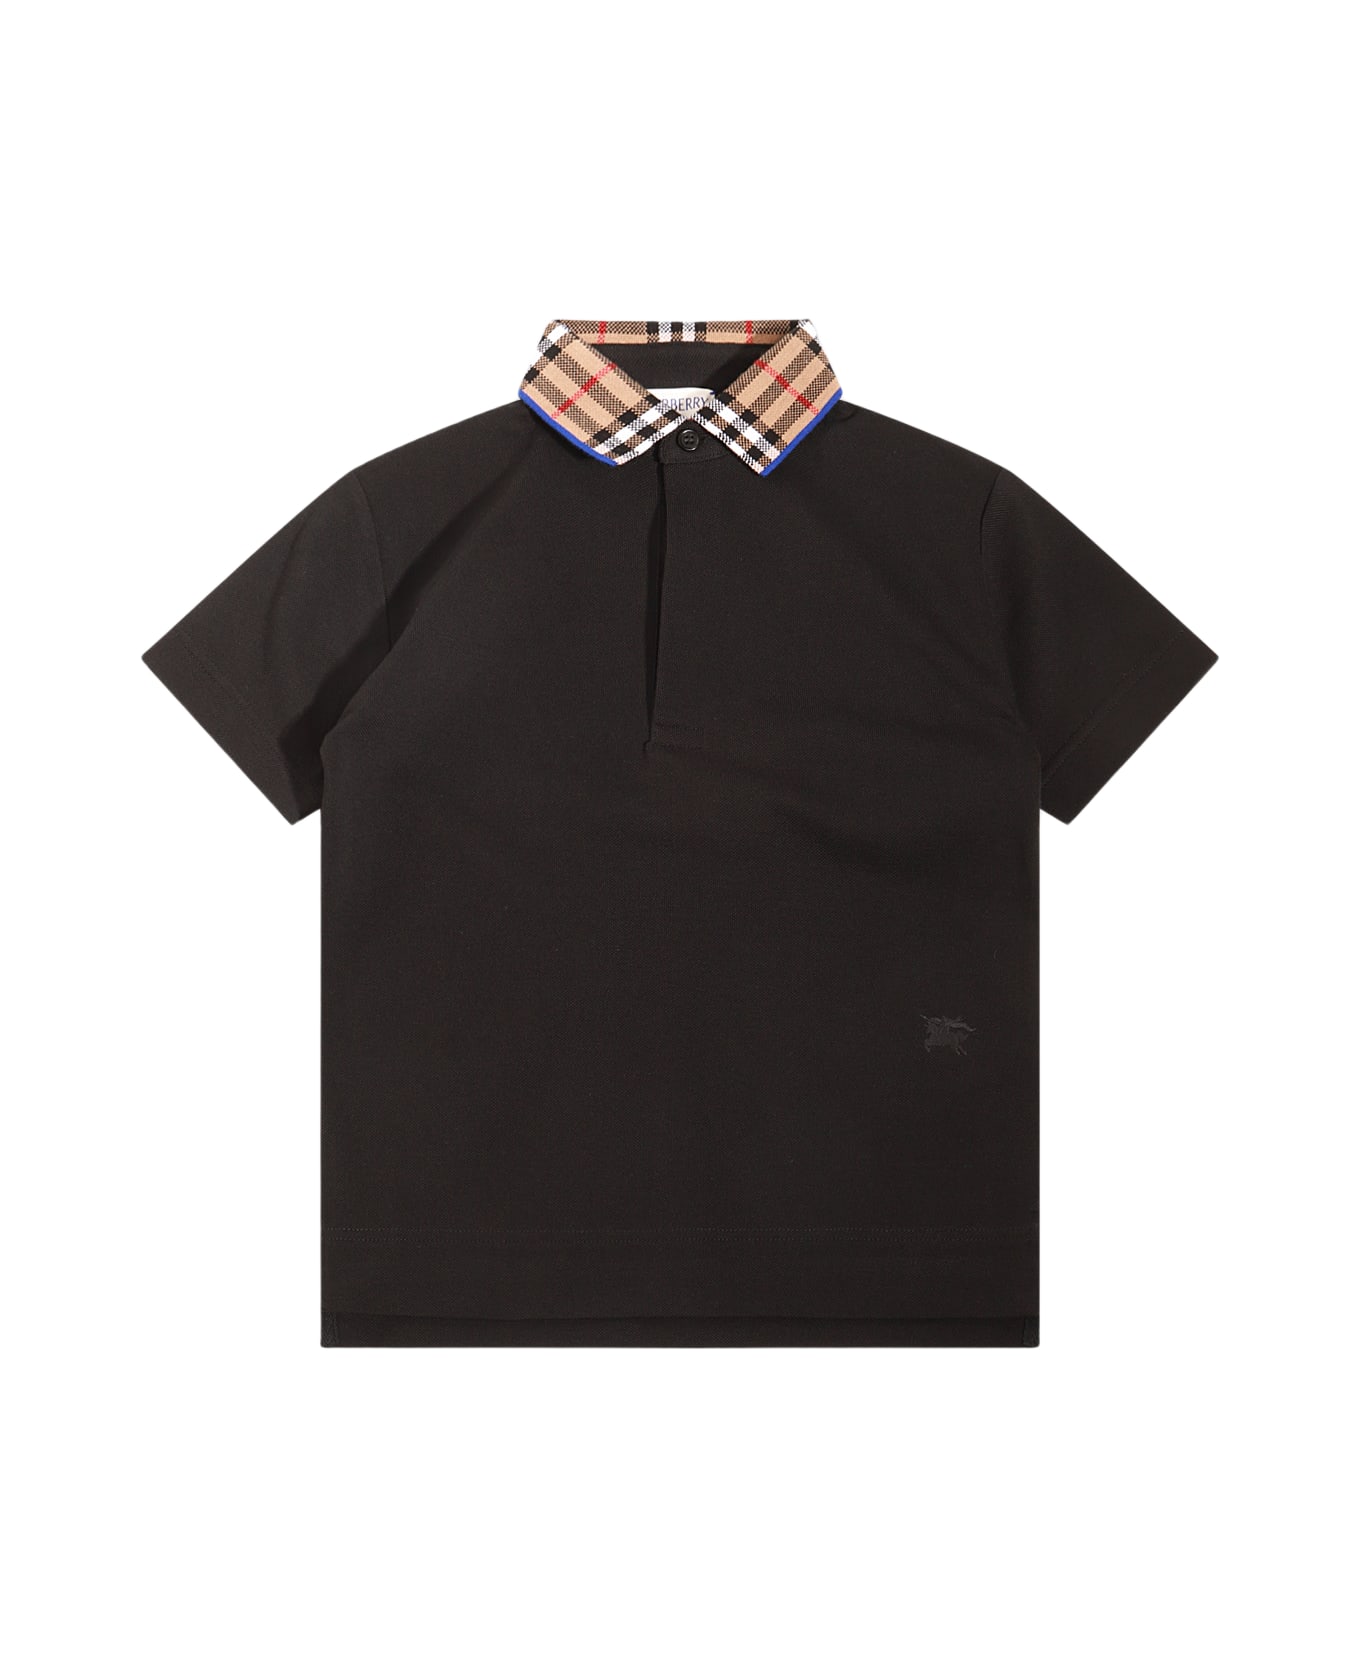 Burberry Black And Archive Beige Cotton Polo Shirt - Black